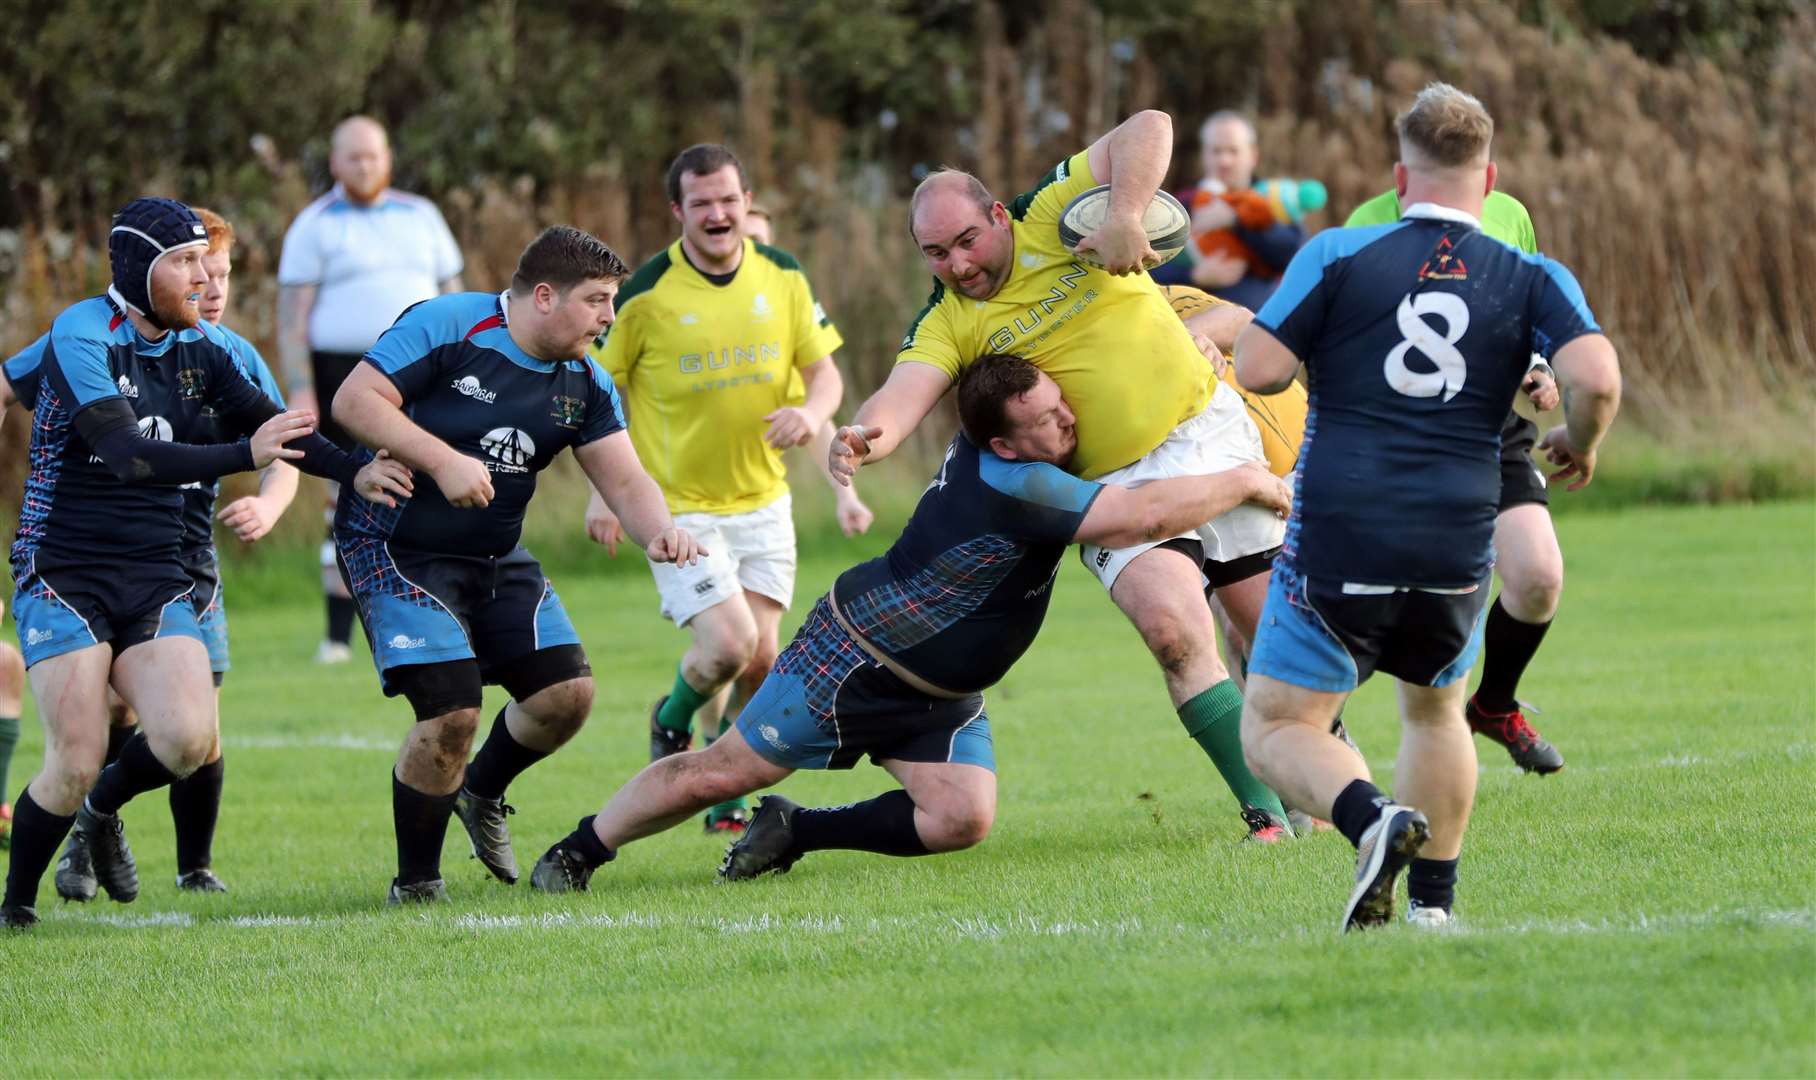 Michael Gunn is brought to a halt just before the try line. Picture: James Gunn